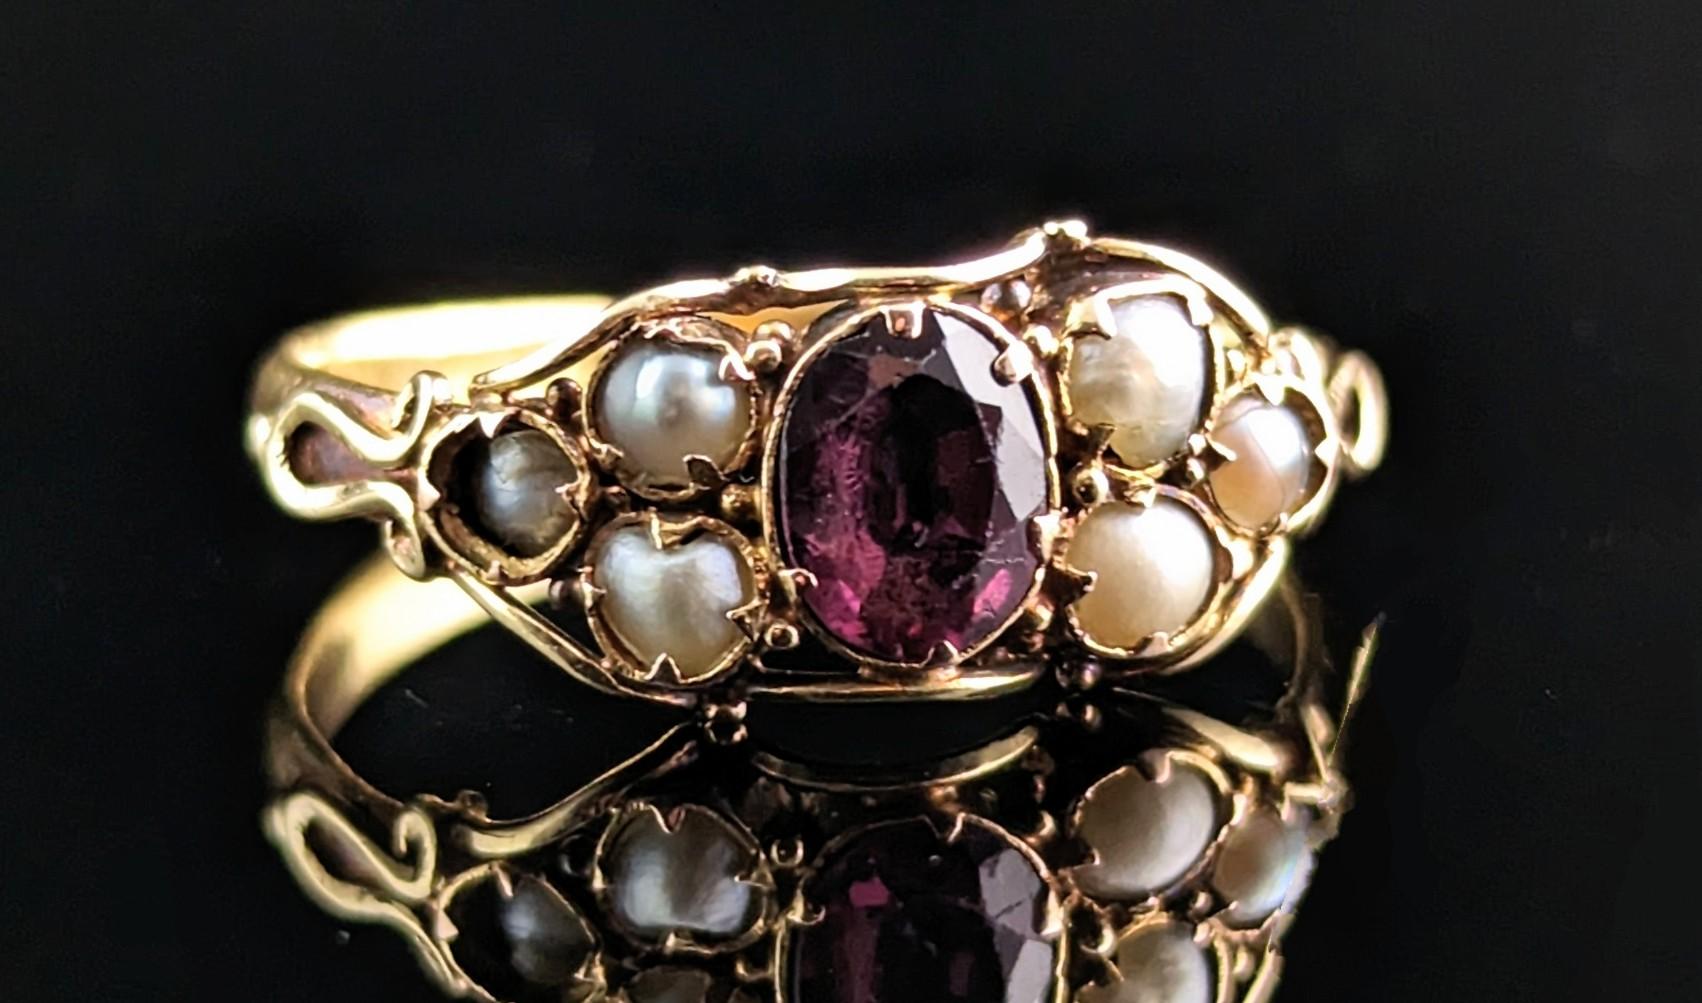 Oval Cut Antique Almandine Garnet and Pearl Ring, 22k Yellow Gold